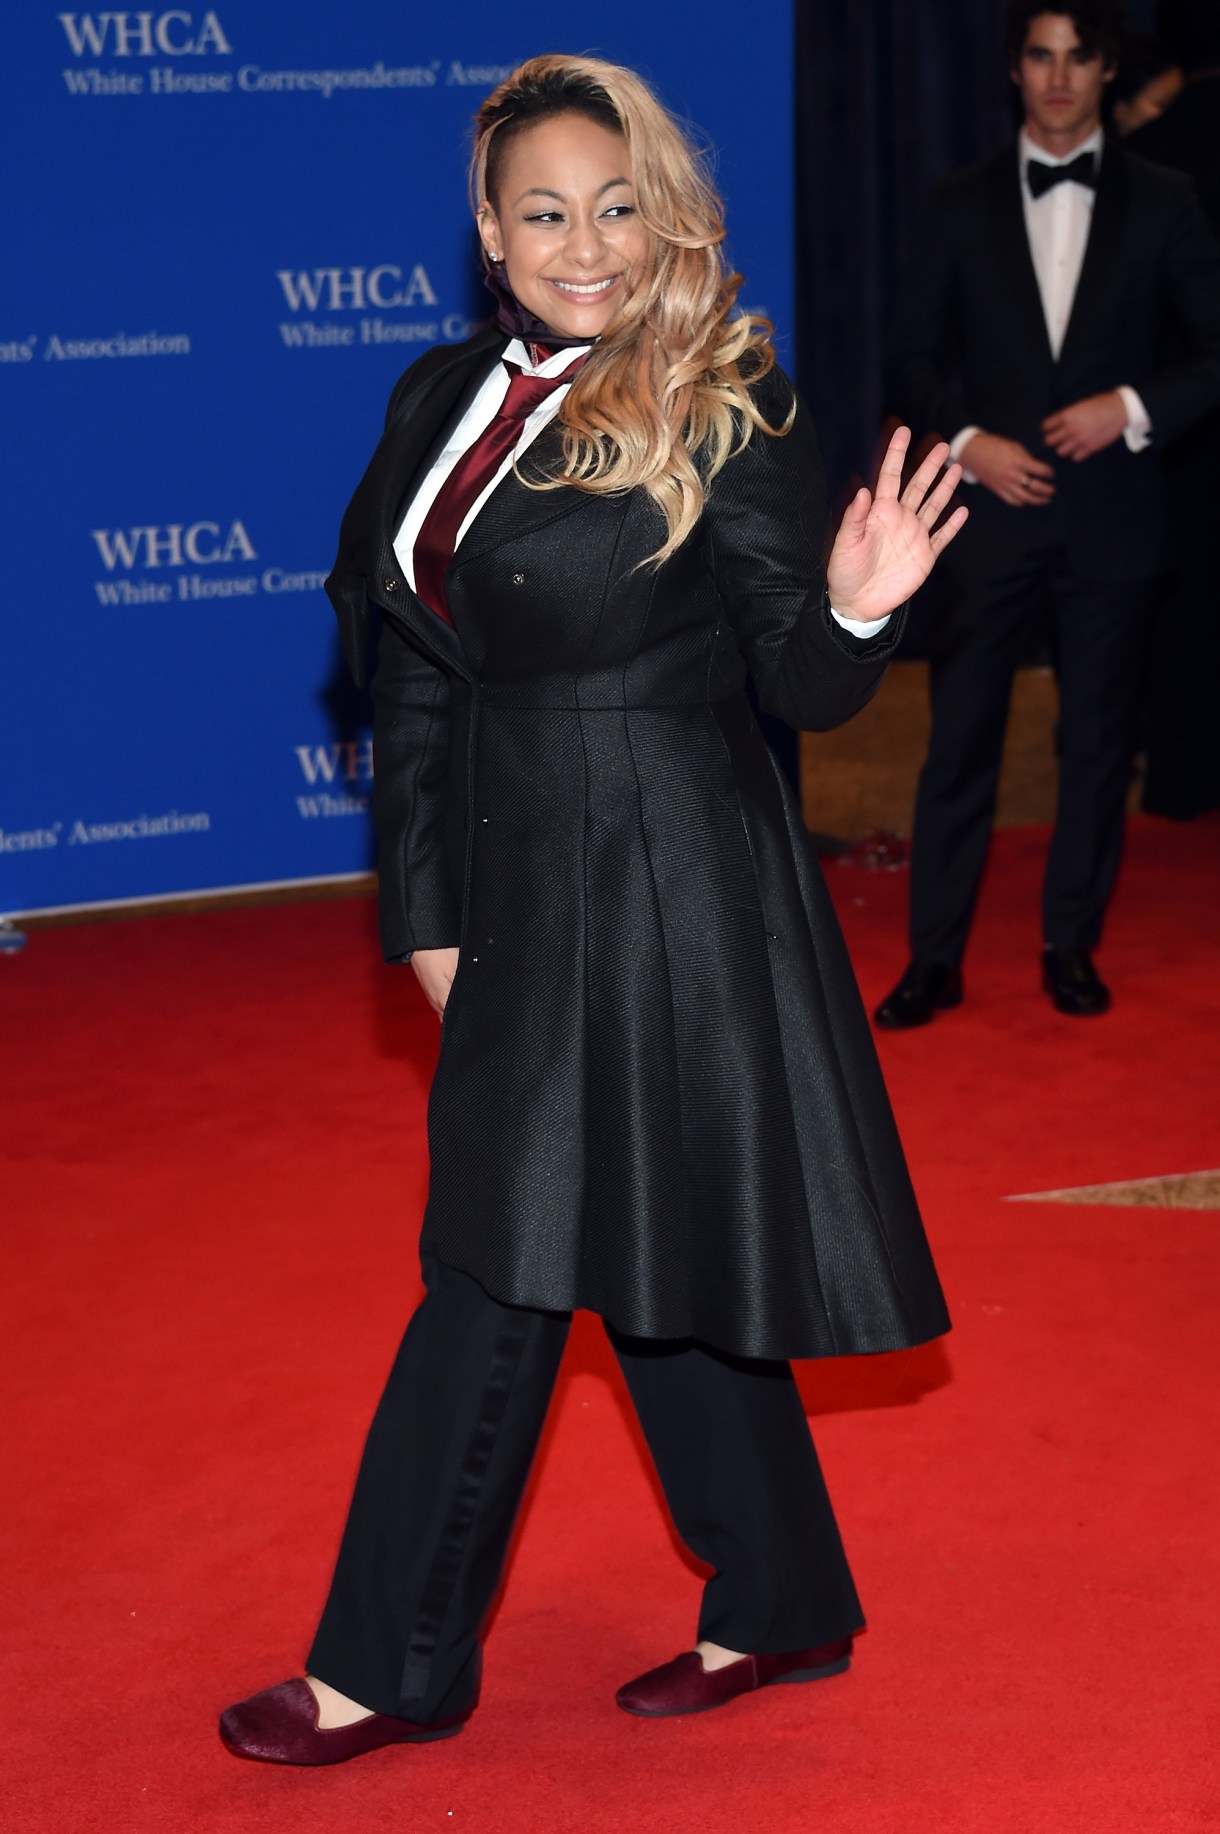 Raven-Symone in a suit and tie at the 102nd White House Correspondents' Association Dinner on April 30, 2016 in Washington, DC